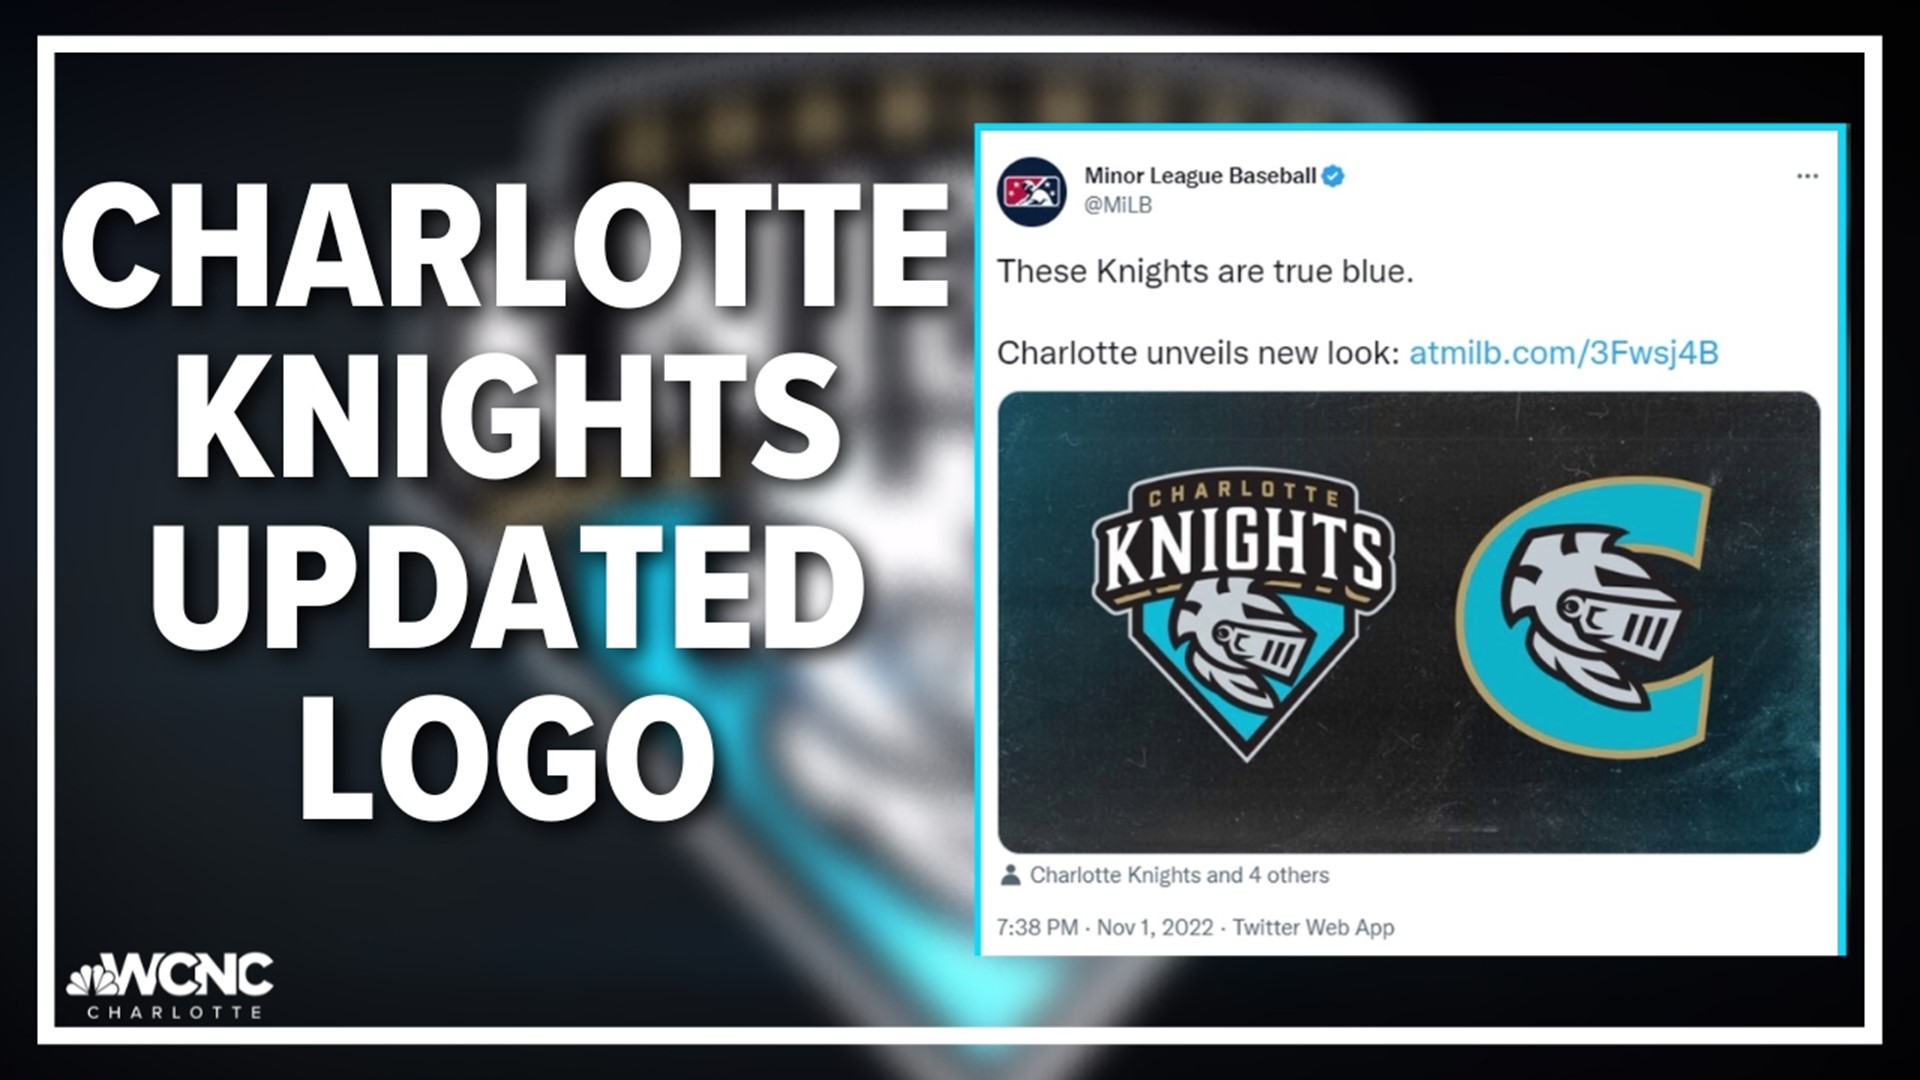 A new era of Charlotte Knights baseball is upon us with the team unveiling its new logo and uniforms for next season.